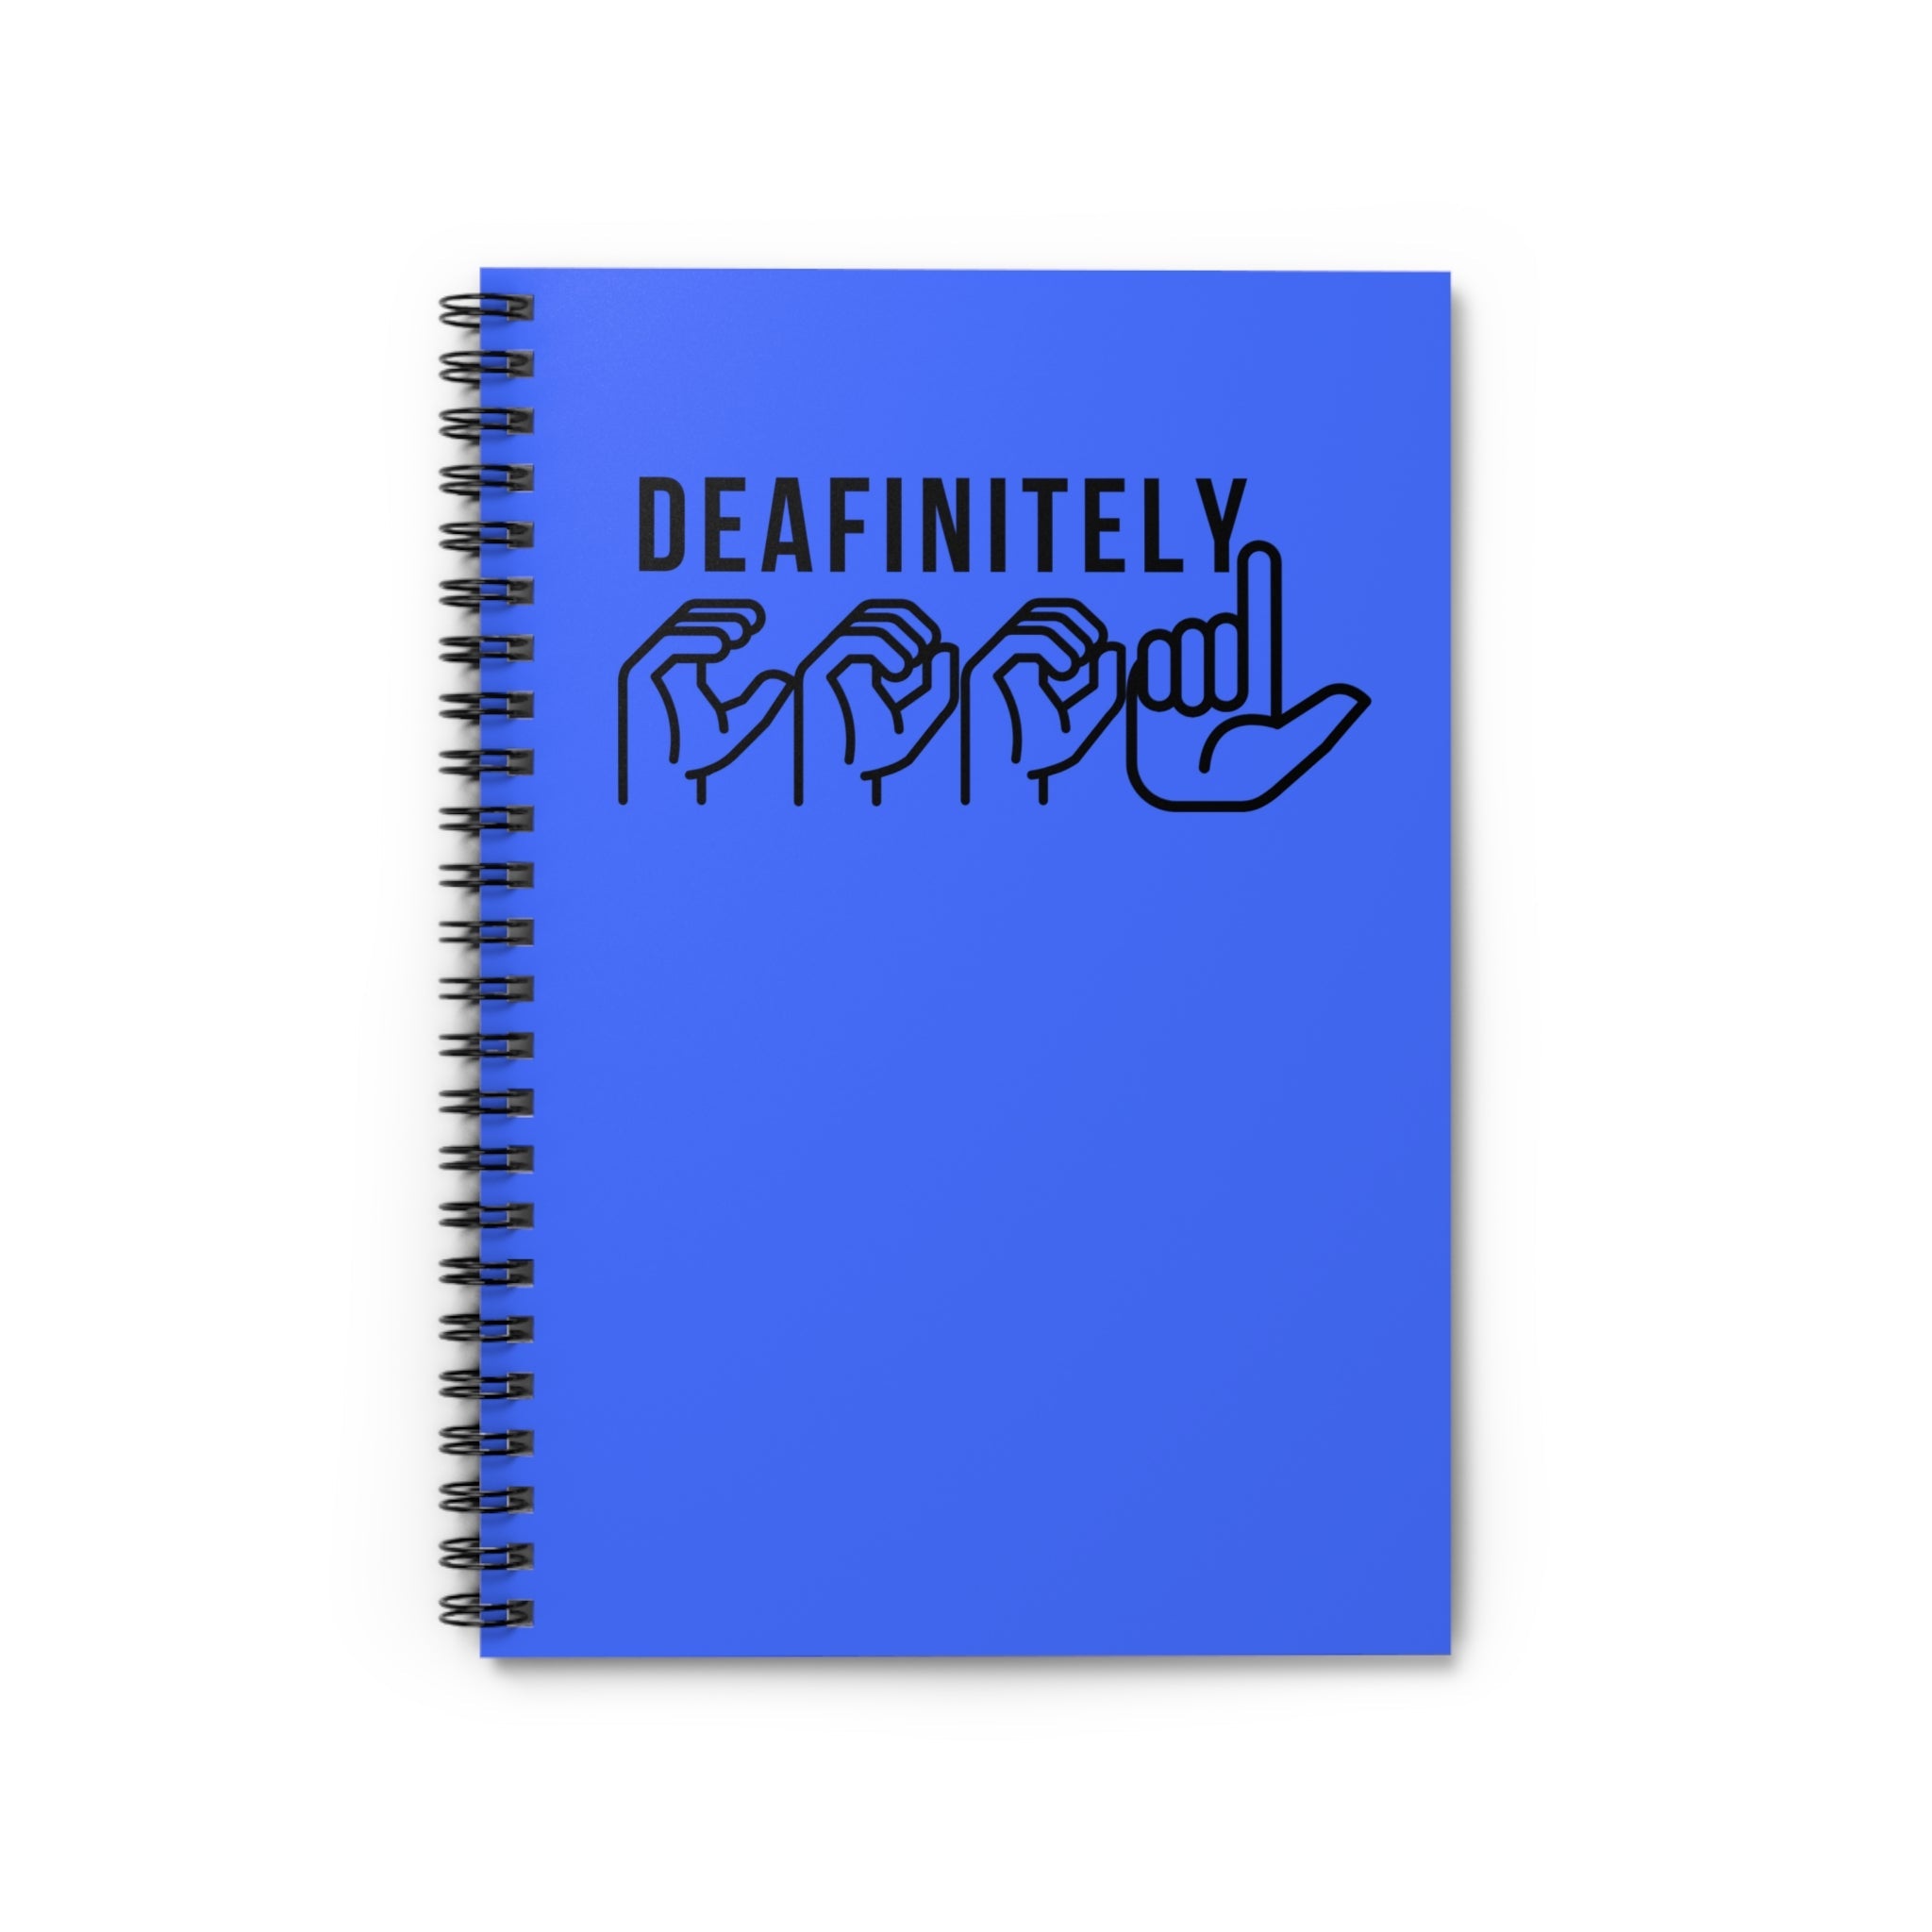 Deafinitely Cool ASL Spiral Notebook - Ruled Line - The Kindness Cause